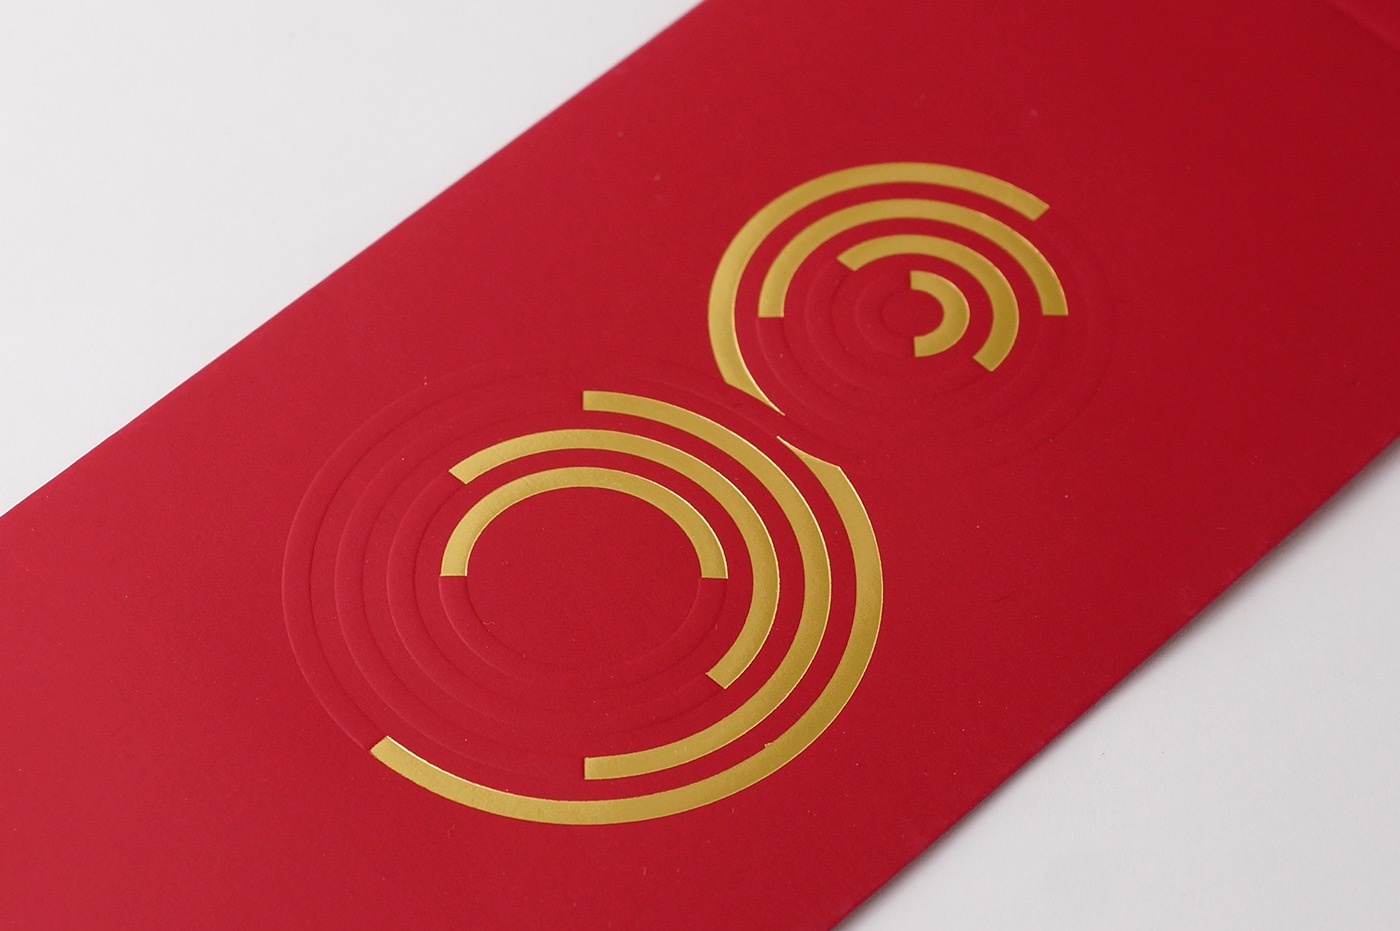 chinese new year Red Packet Ang Pow cny hotstamping Blind Emboss minimal